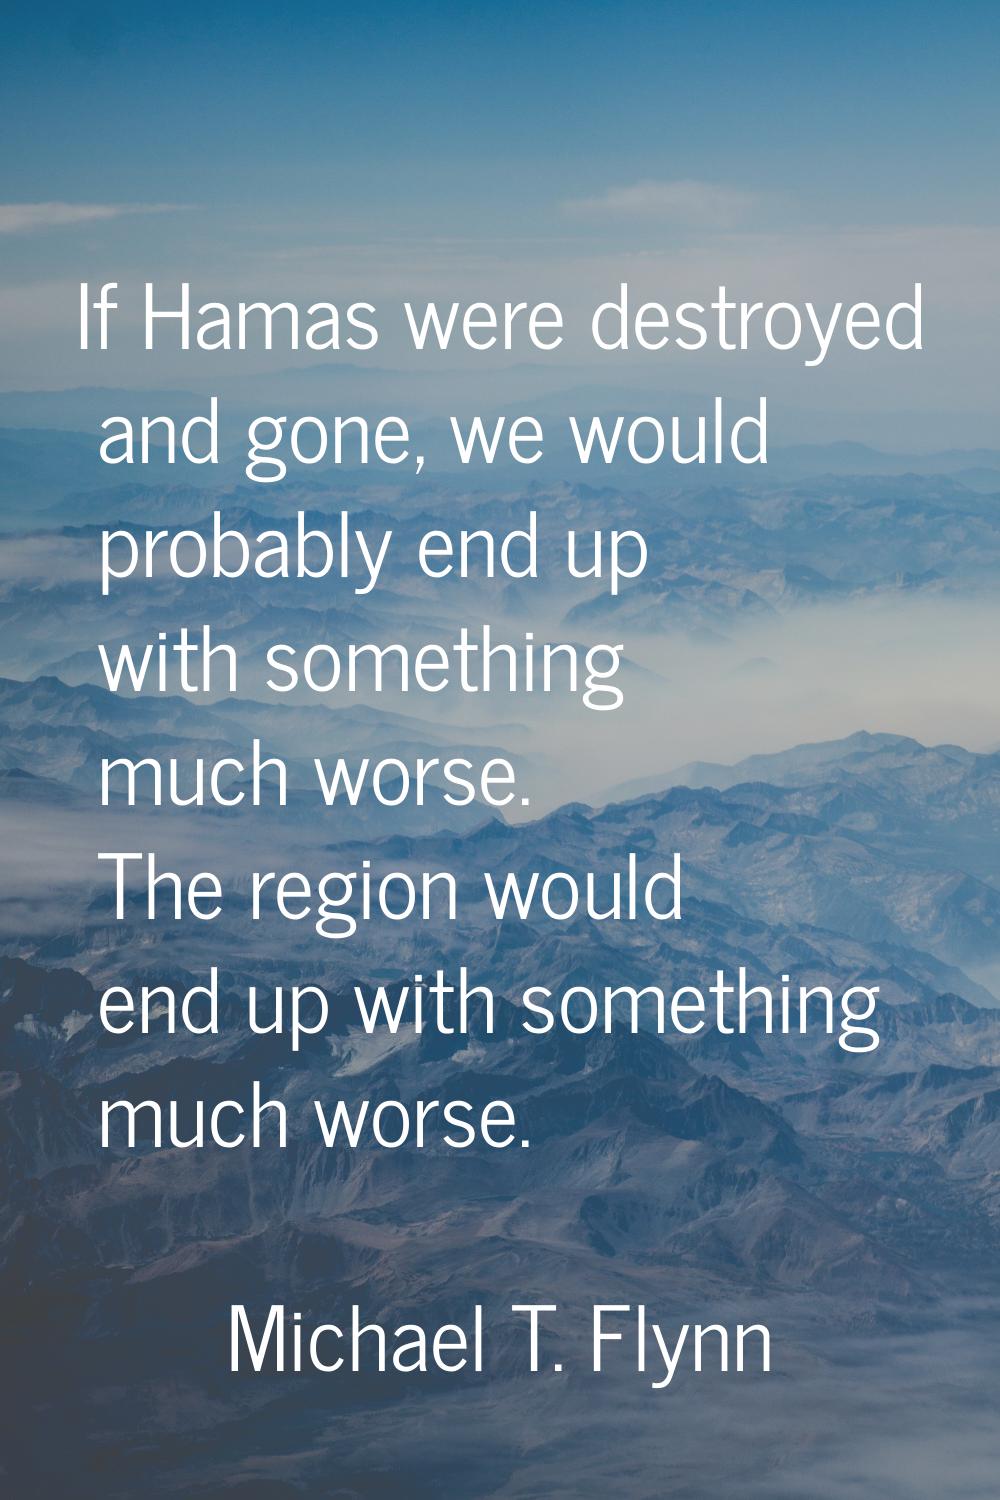 If Hamas were destroyed and gone, we would probably end up with something much worse. The region wo